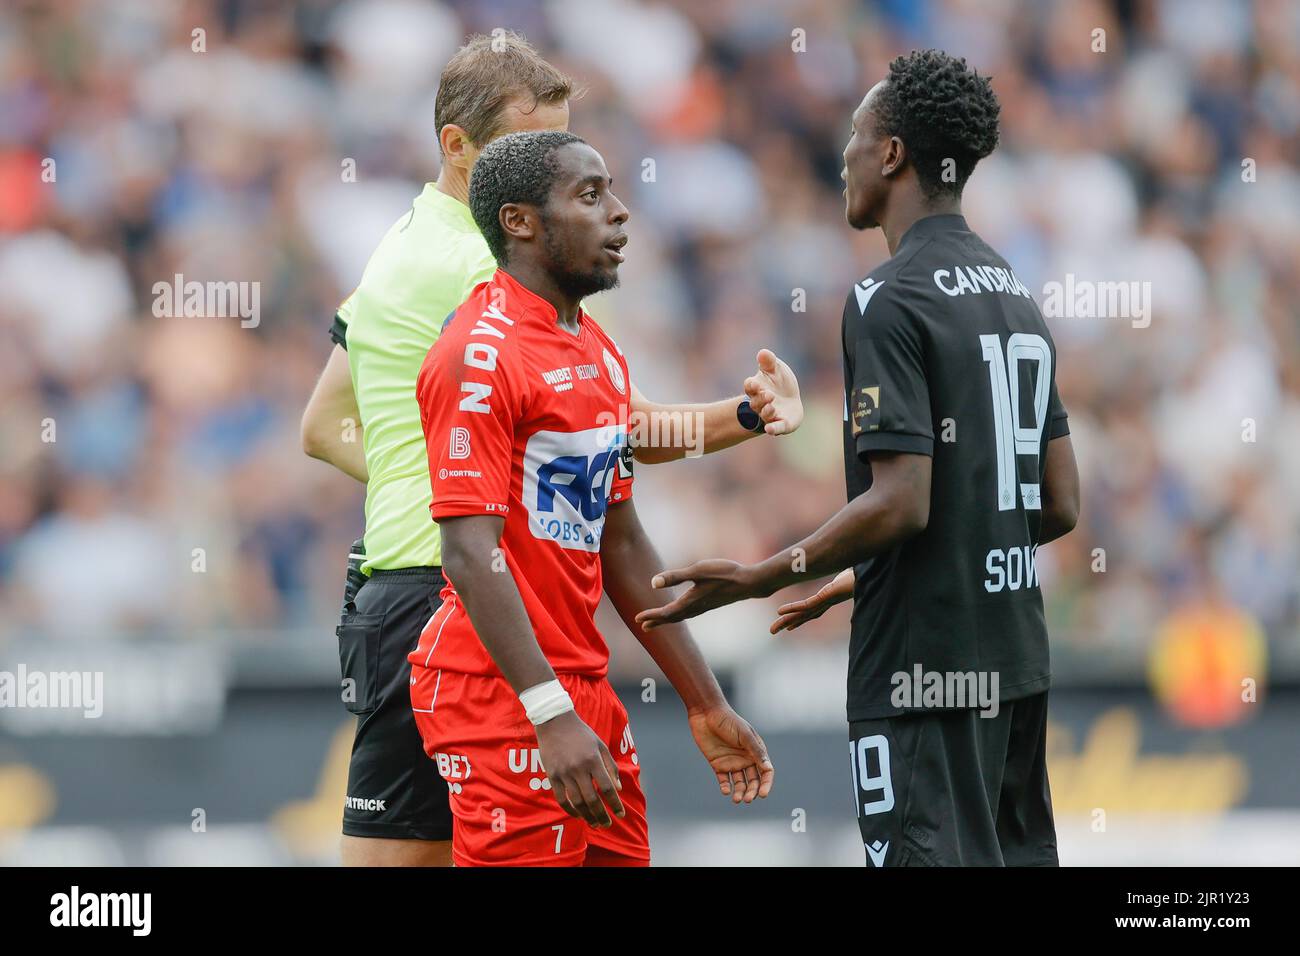 Brugge, Belgium, 21 August 2022, Kortrijk's Dylan Mbayo and Club's Kamal Sowah pictured during a soccer match between Club Brugge and KV Kortrijk, Sunday 21 August 2022 in Brugge, on day 5 of the 2022-2023 'Jupiler Pro League' first division of the Belgian championship. BELGA PHOTO BRUNO FAHY Stock Photo